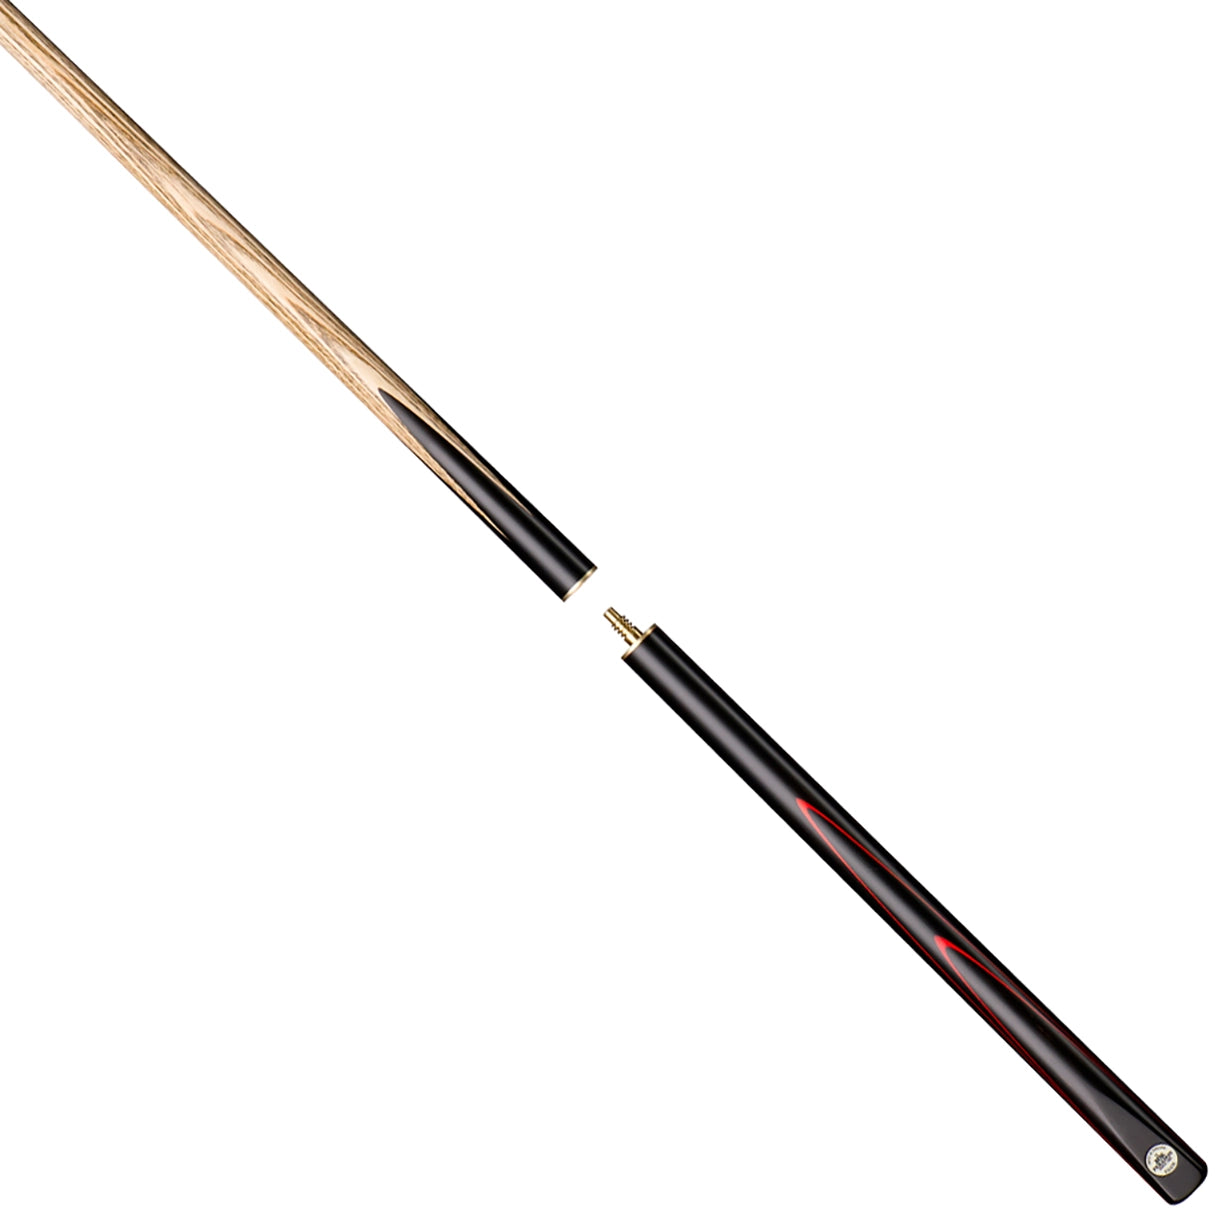 Peradon Eden 3/4 jointed Snooker cue. Seperated view